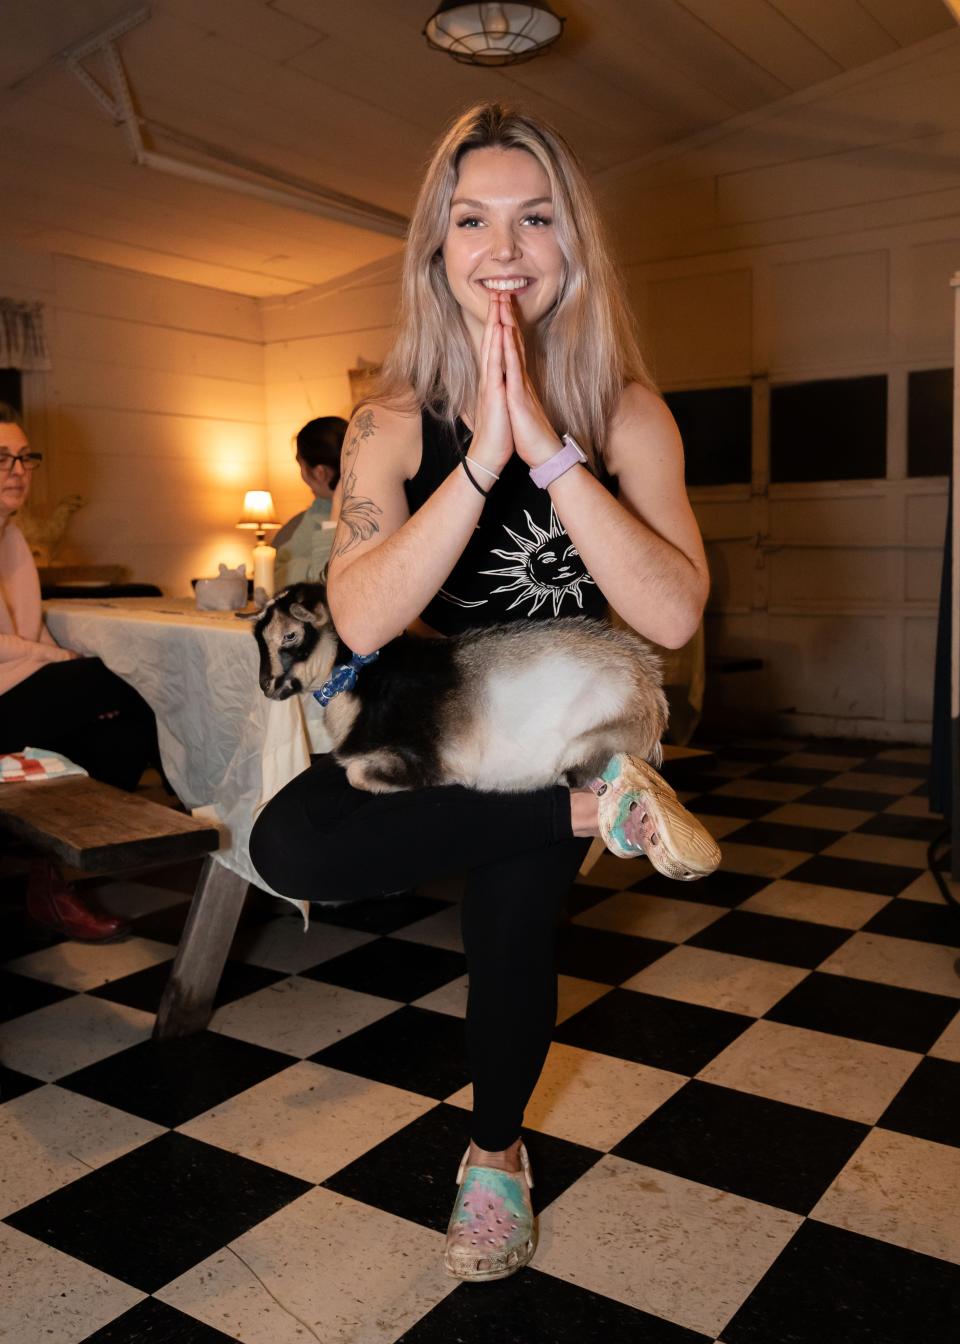 Yoga instructor Jessica Lescrinier performs a one-legged chair pose with Pepper the goat at Wine-yasa Goat Yoga night at Legacy Lane Farm in Stratham.